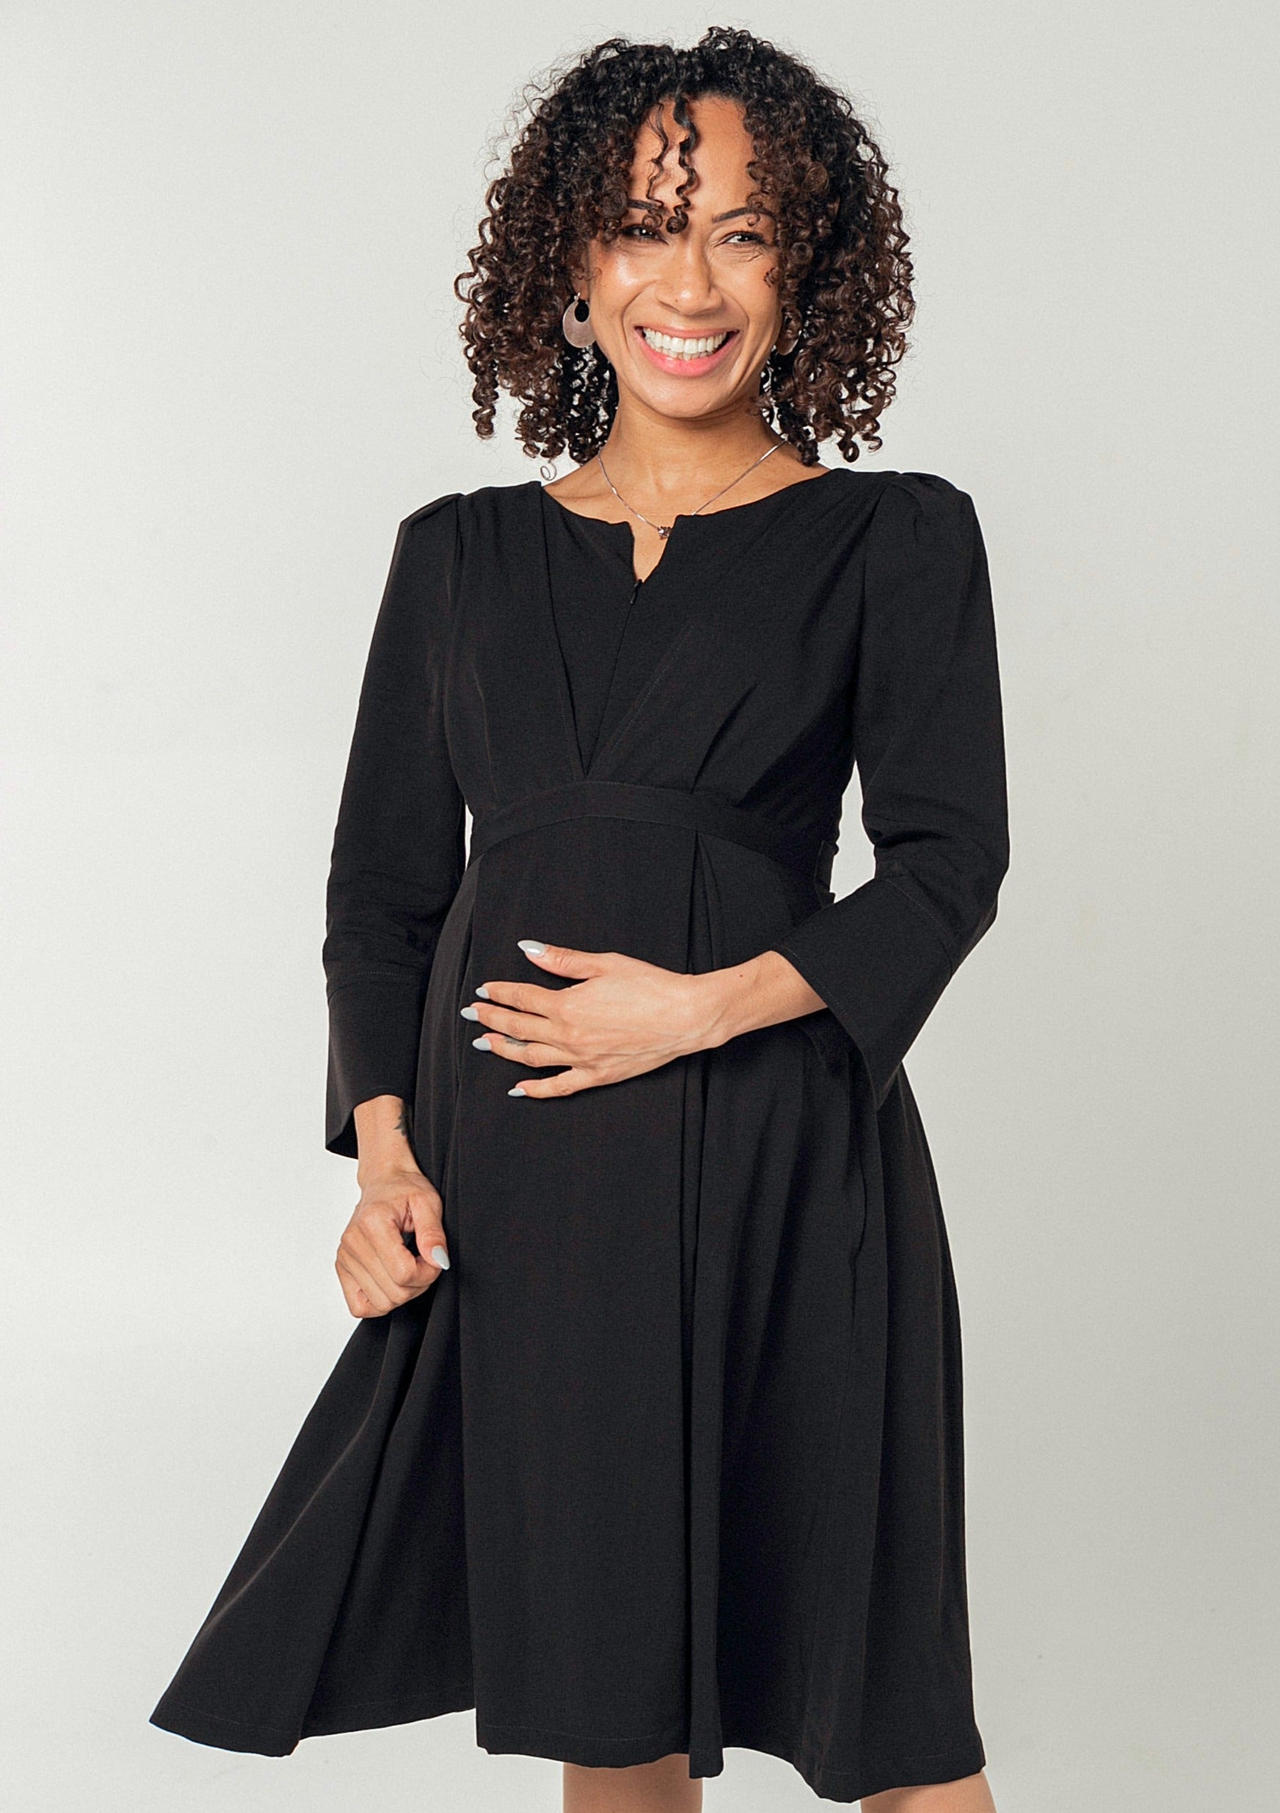 Stylish Petite Maternity Dresses for Comfort and F by